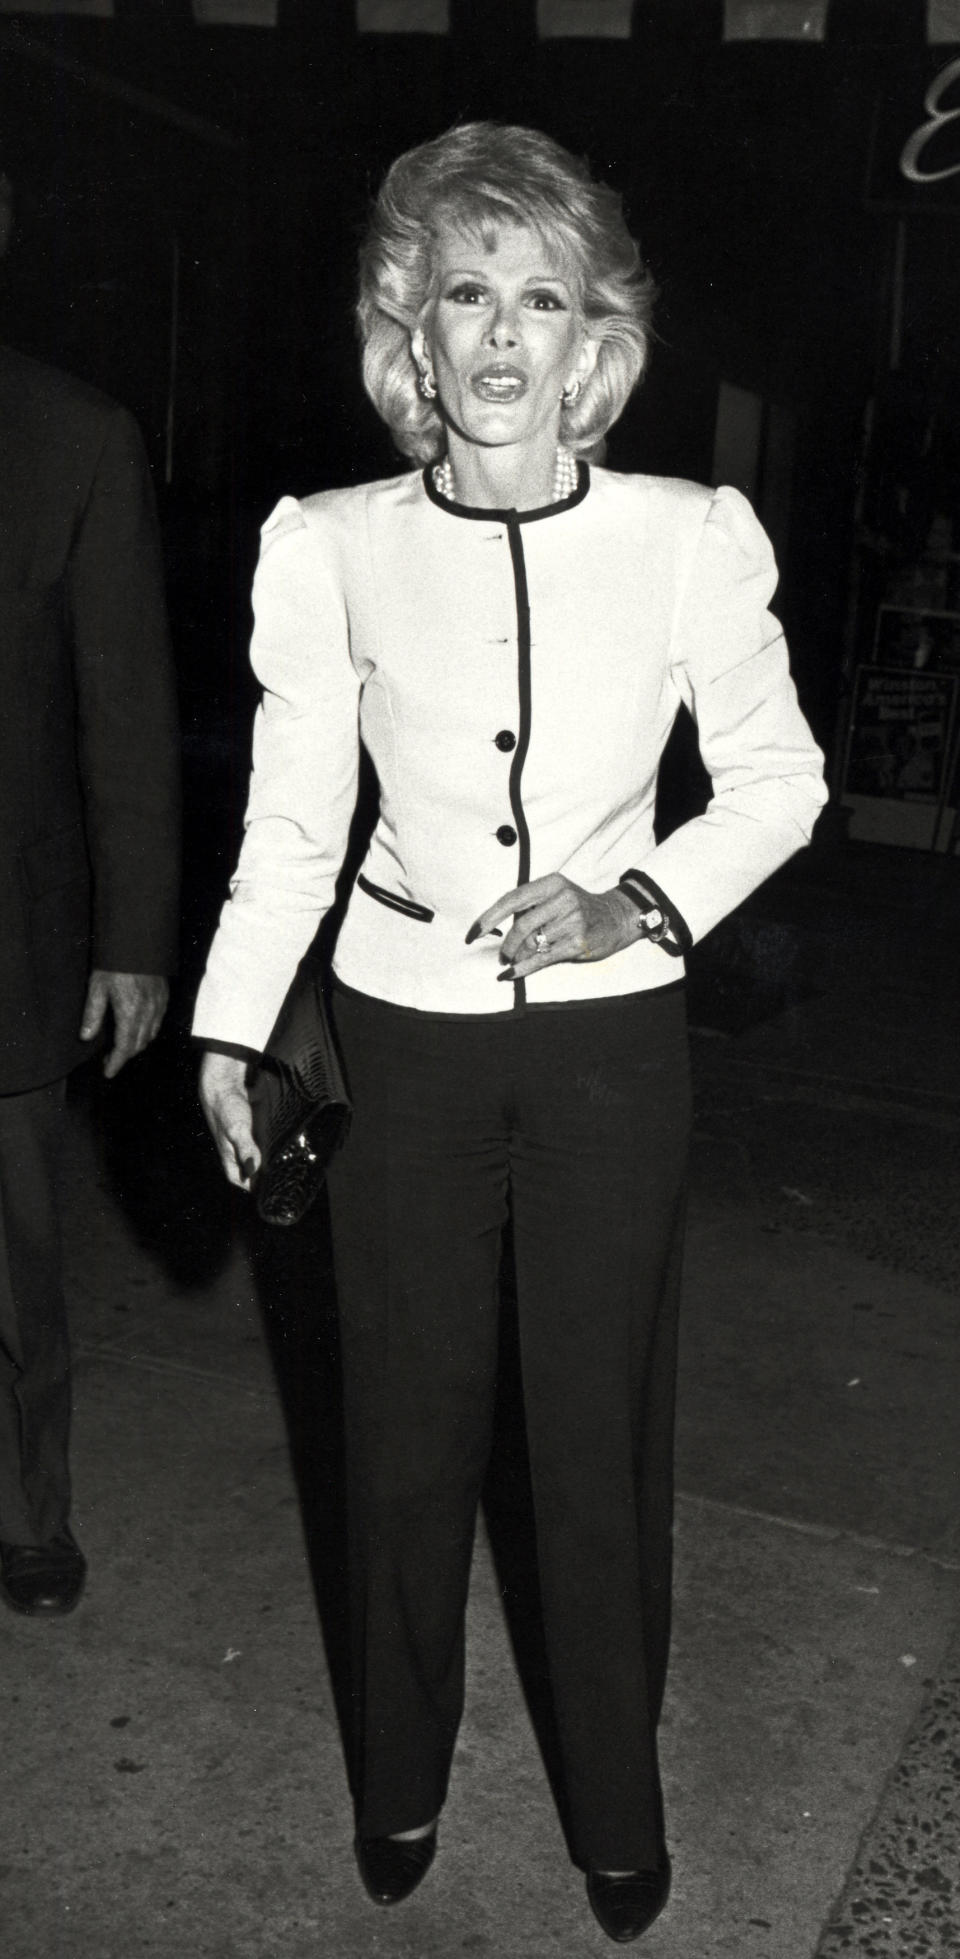 Joan Rivers at Elaine's Restaurant in New York City in 1984. (Ron Galella/WireImage)